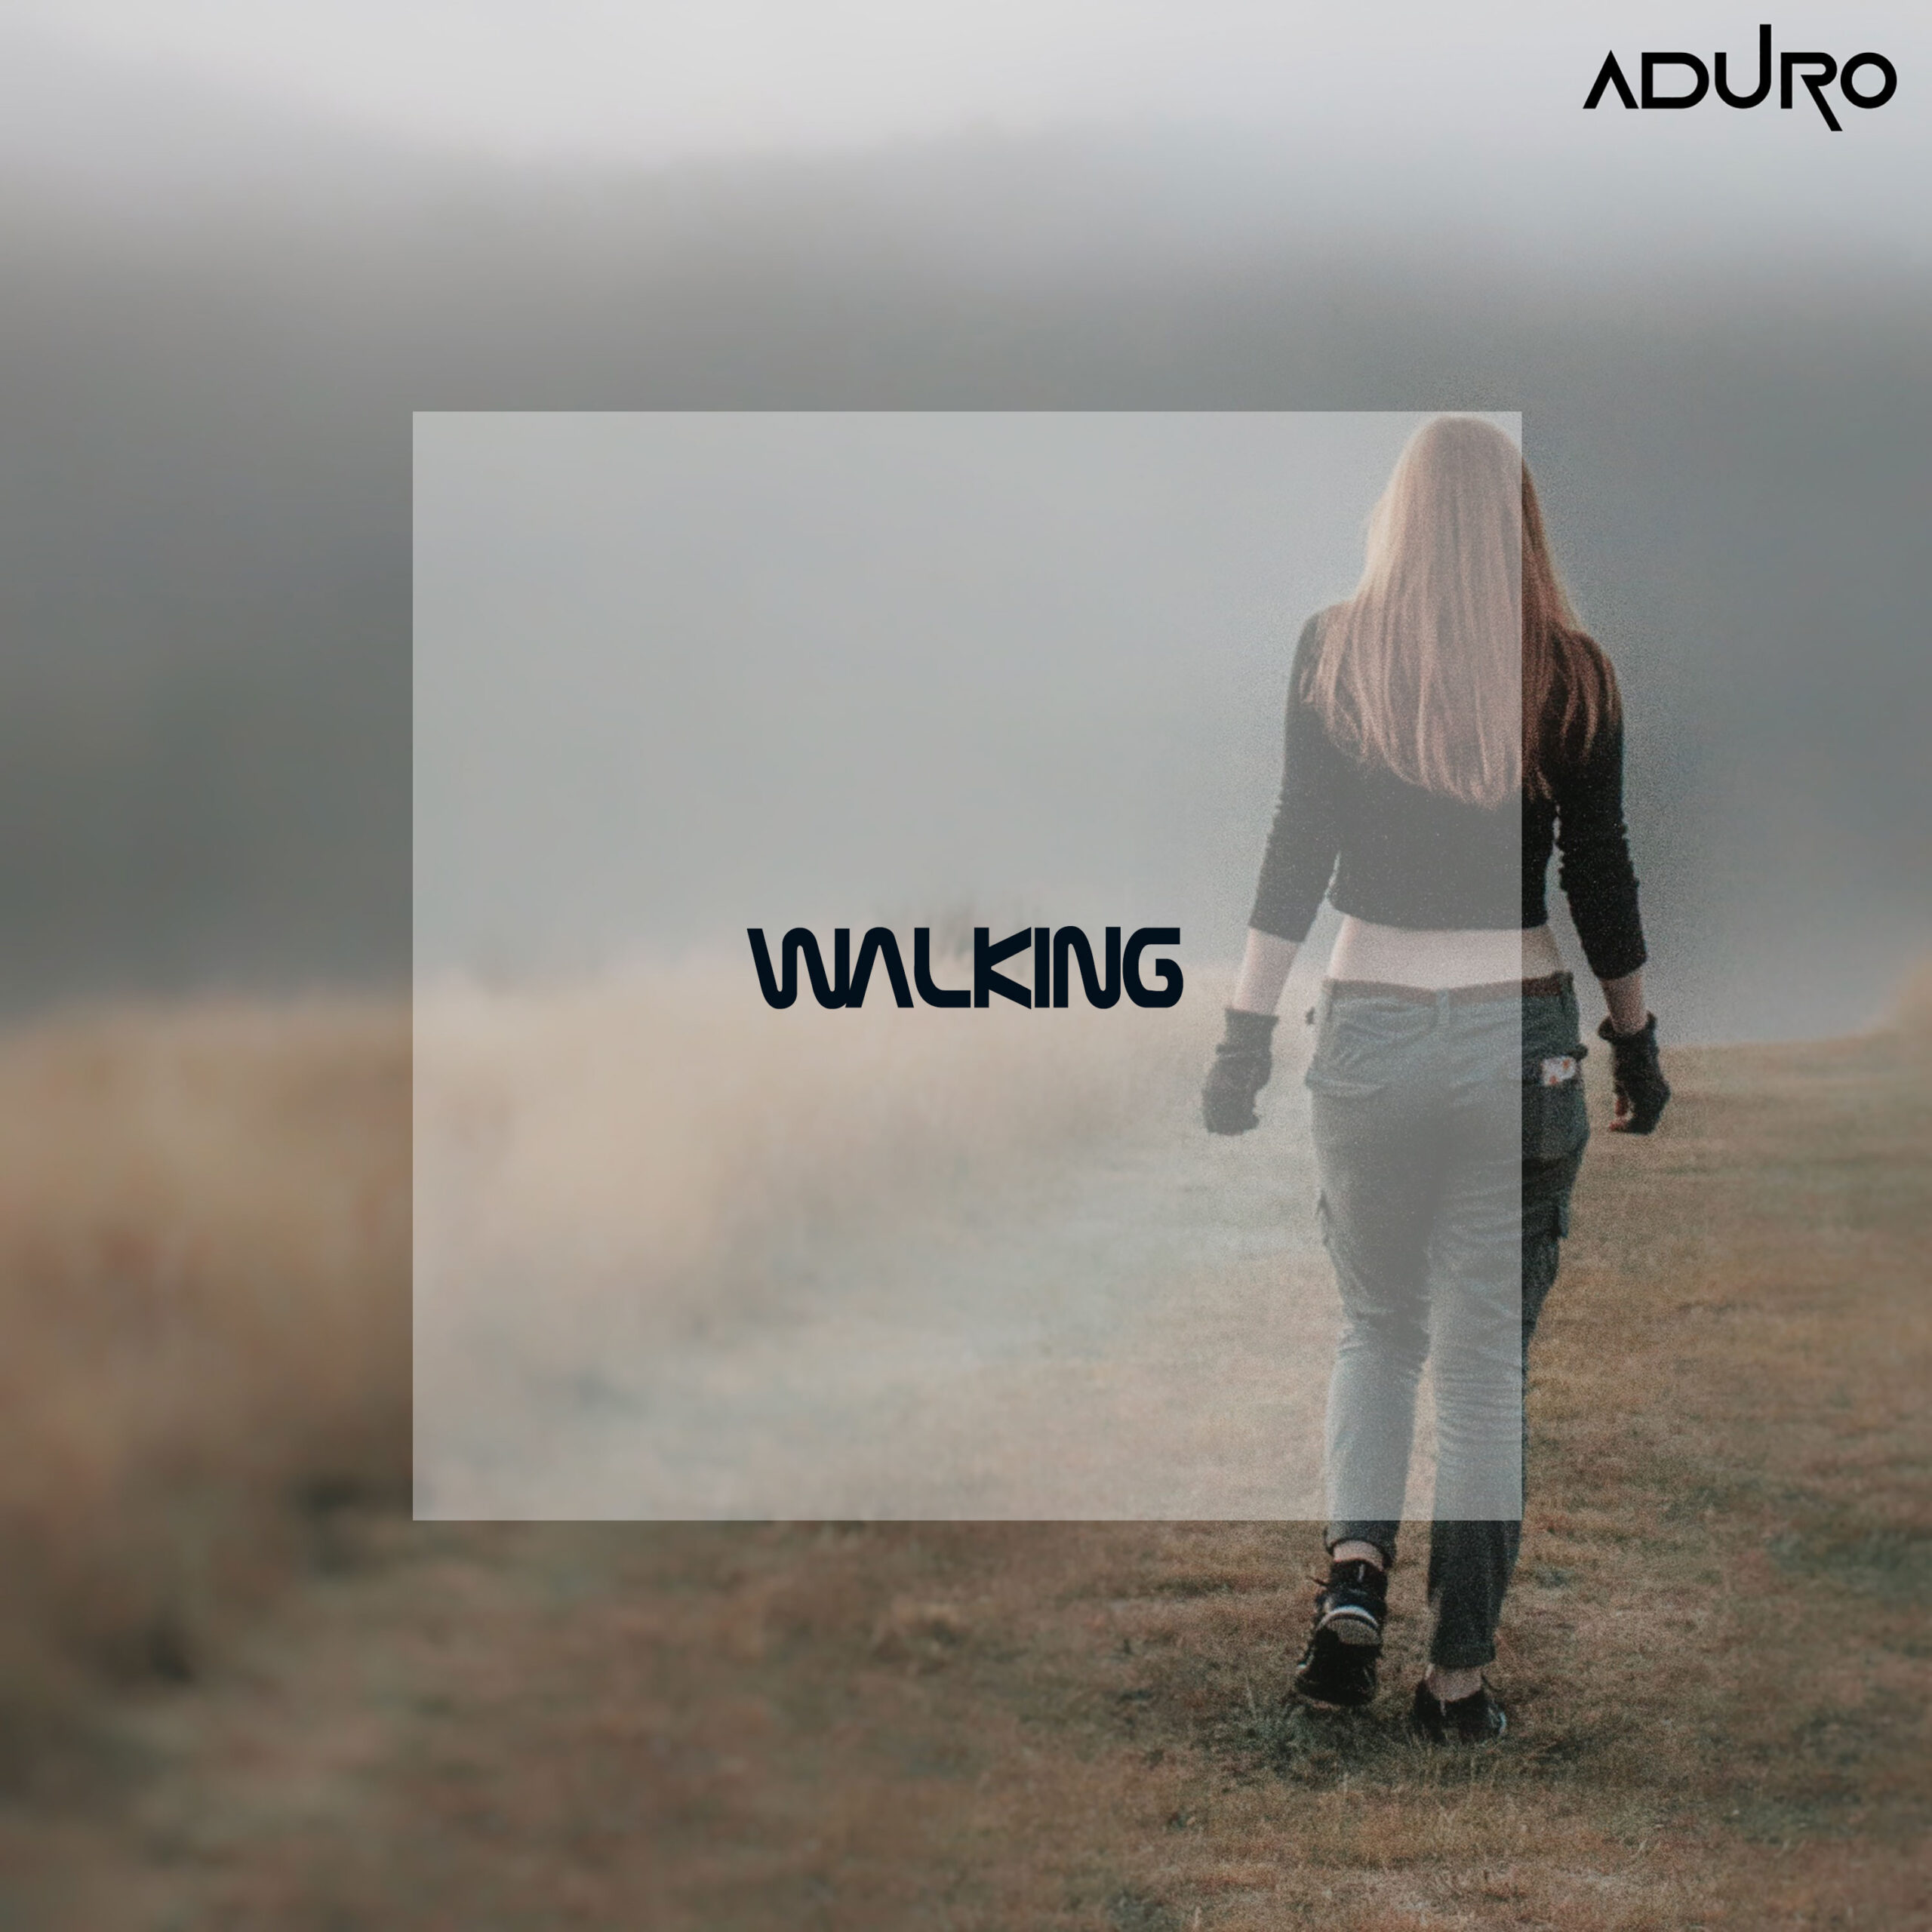 https://www.ultimate-house-records.com/wp-content/uploads/2024/02/UD-026-Aduro-Walking_Cover_web-scaled.jpg